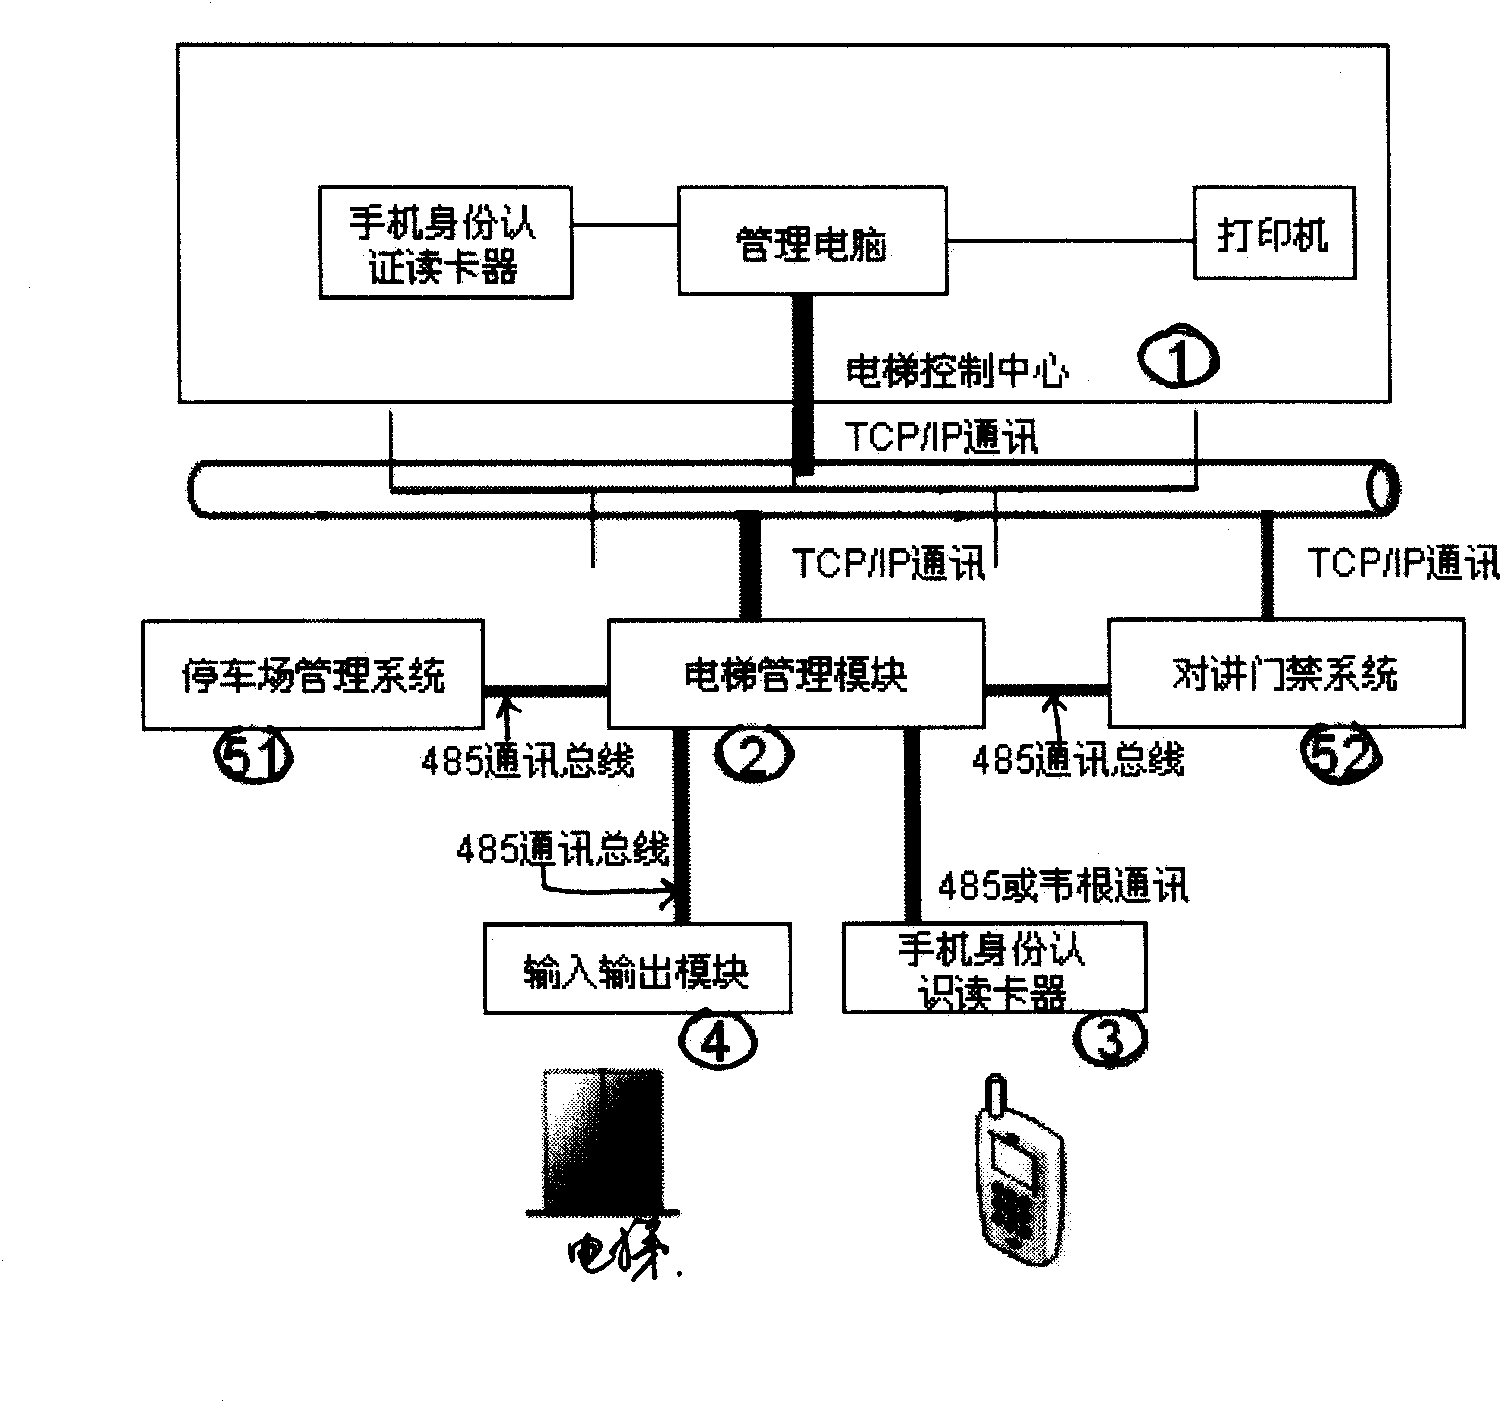 System and method for controlling elevator enabling by mobile phone swiping card